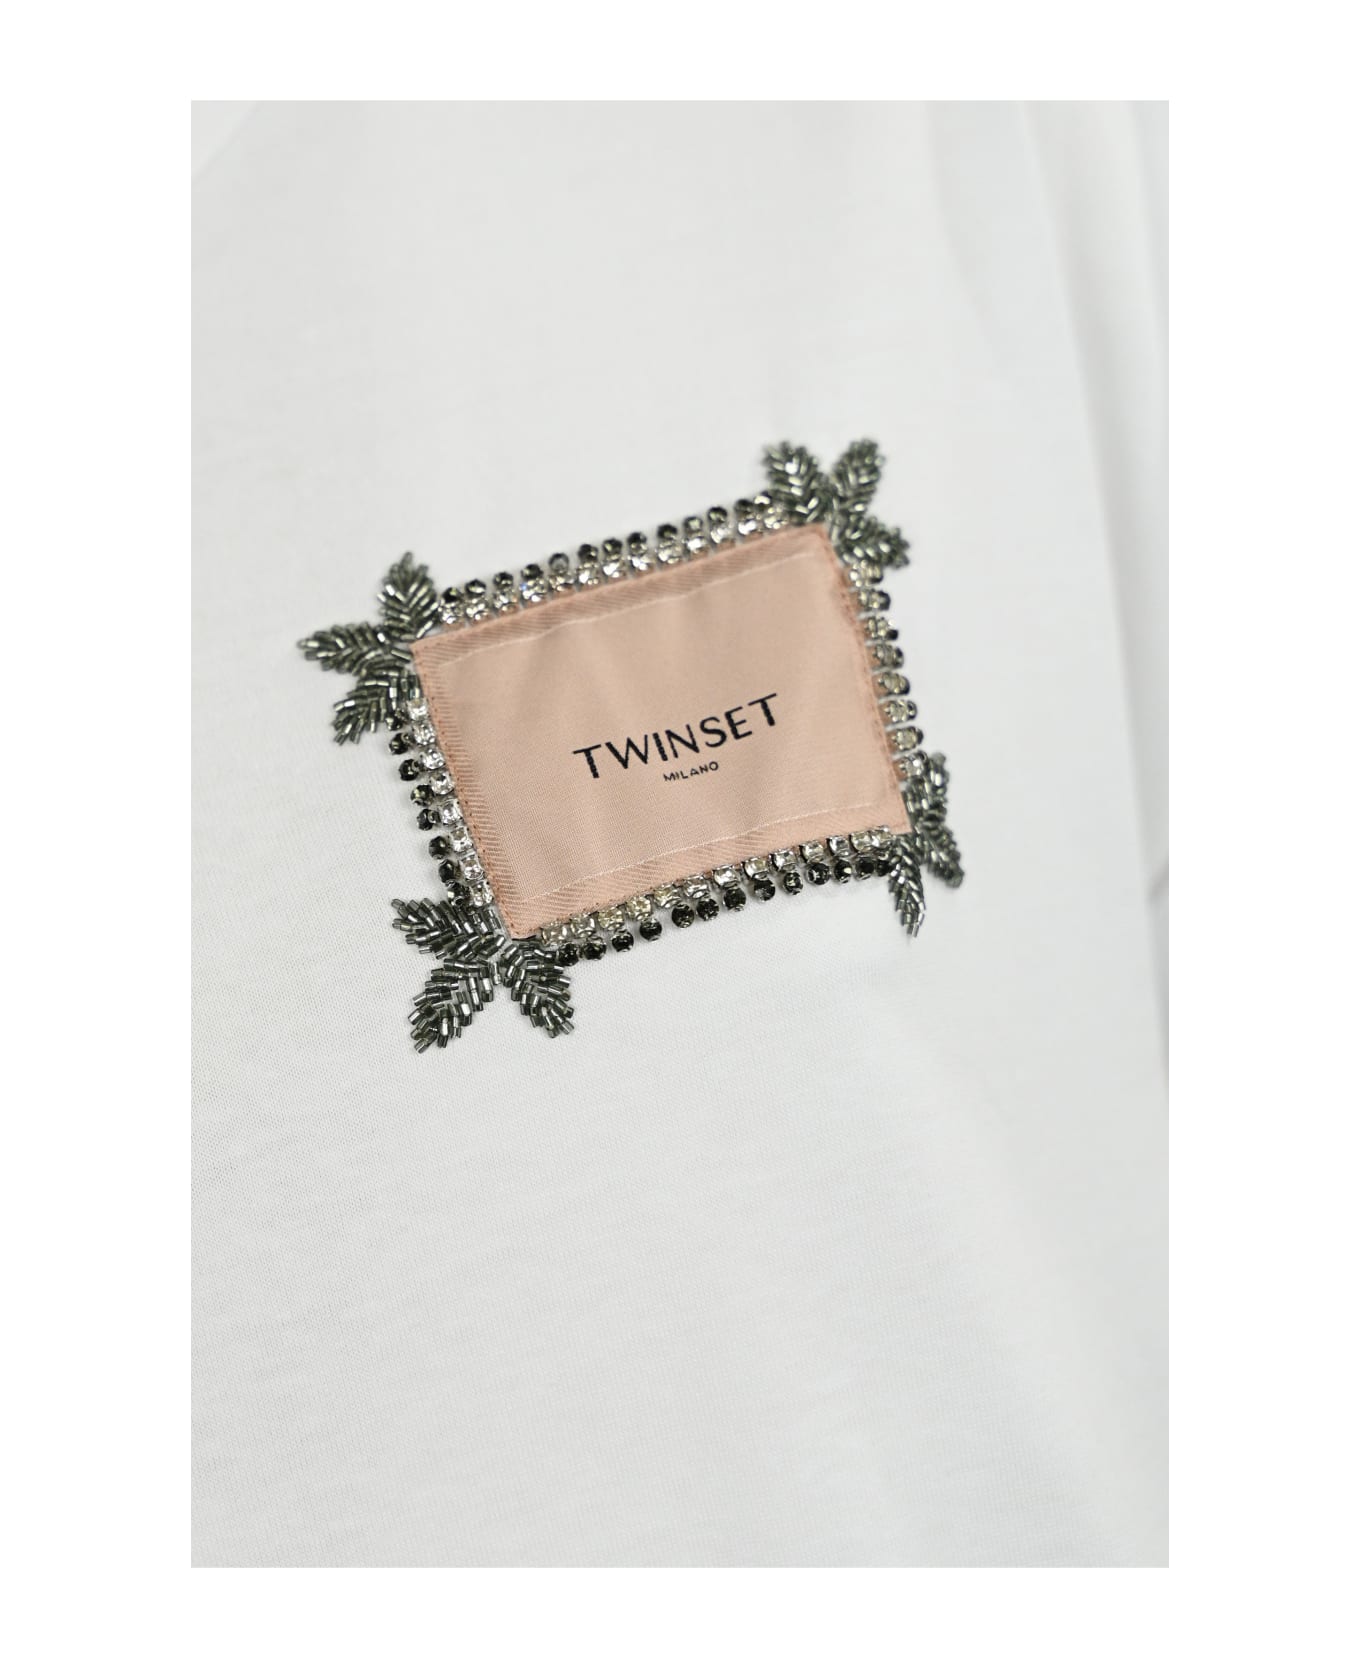 TwinSet T-shirt With Label And Rhinestones - White